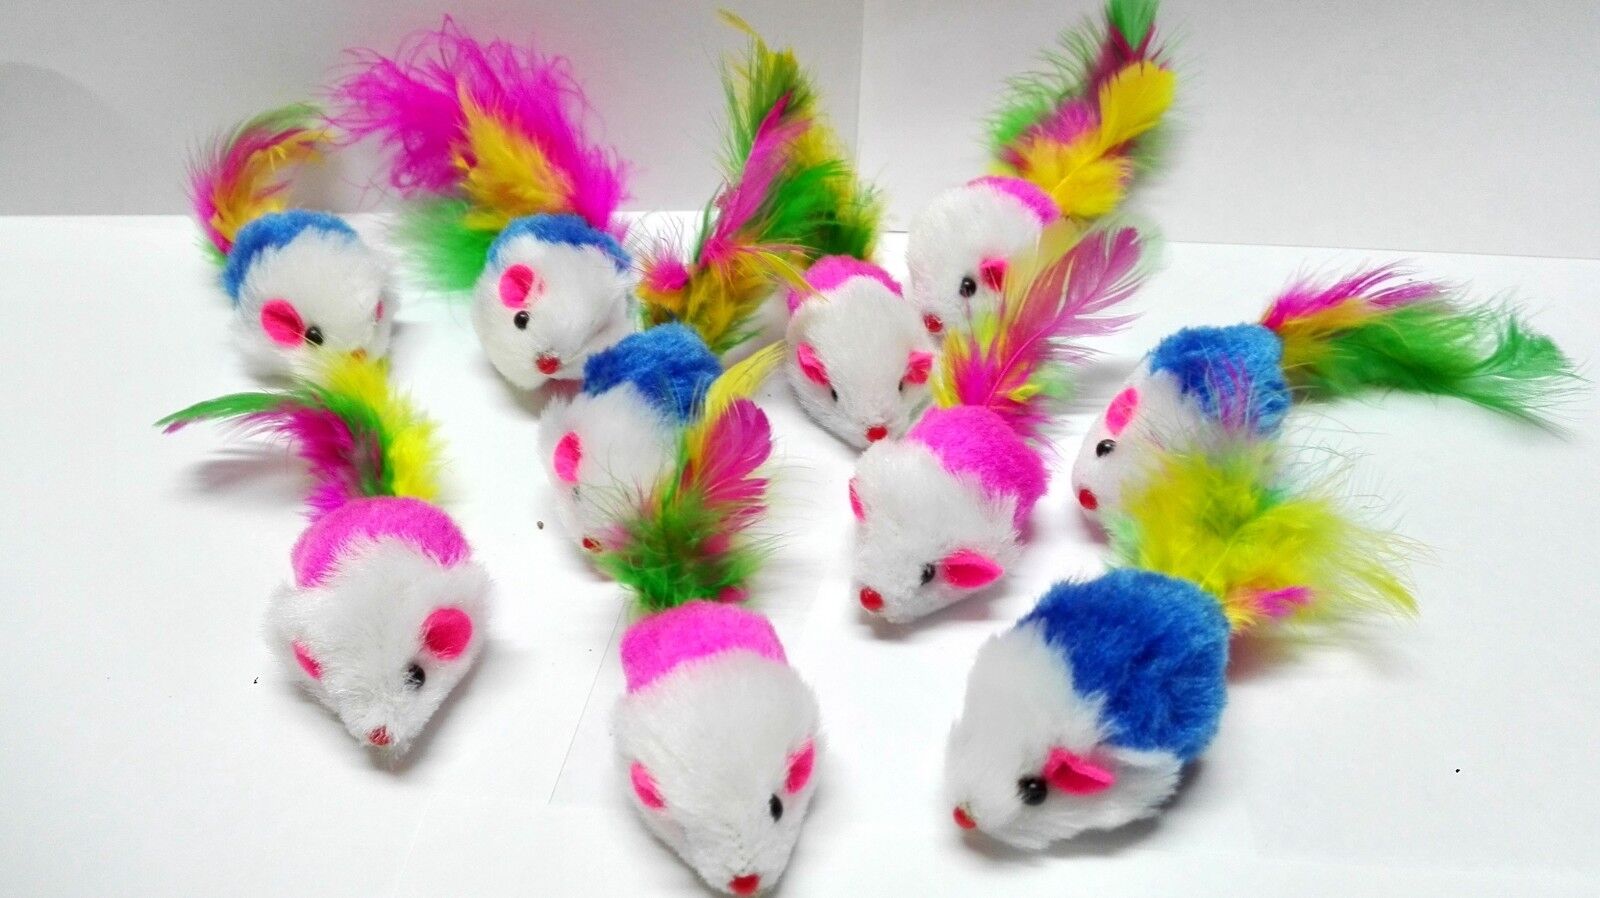 Fur Mice Cat Toys, Soft and Durable for Play , Catnip Mice for kittens. 10 Pack